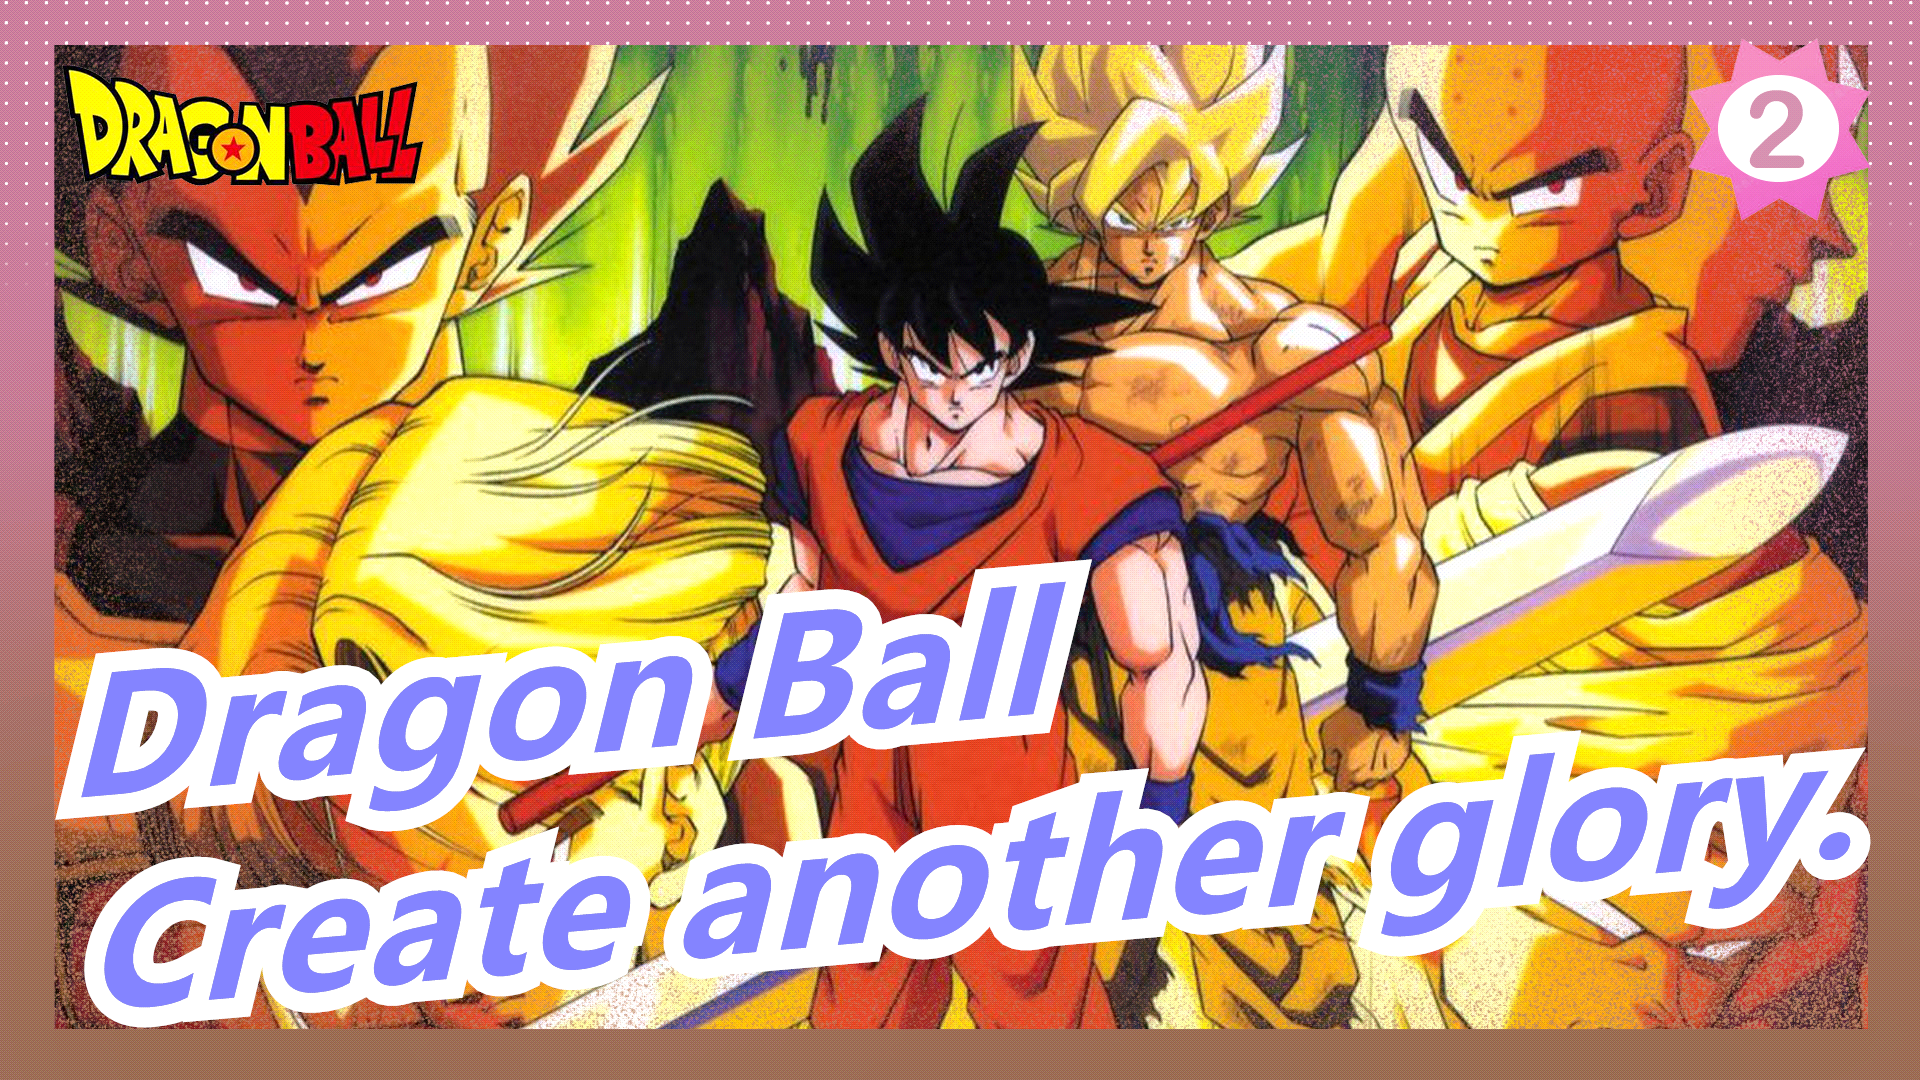 Dragon Ball|60 year old guys, can you still fight? May you create another   - Bilibili